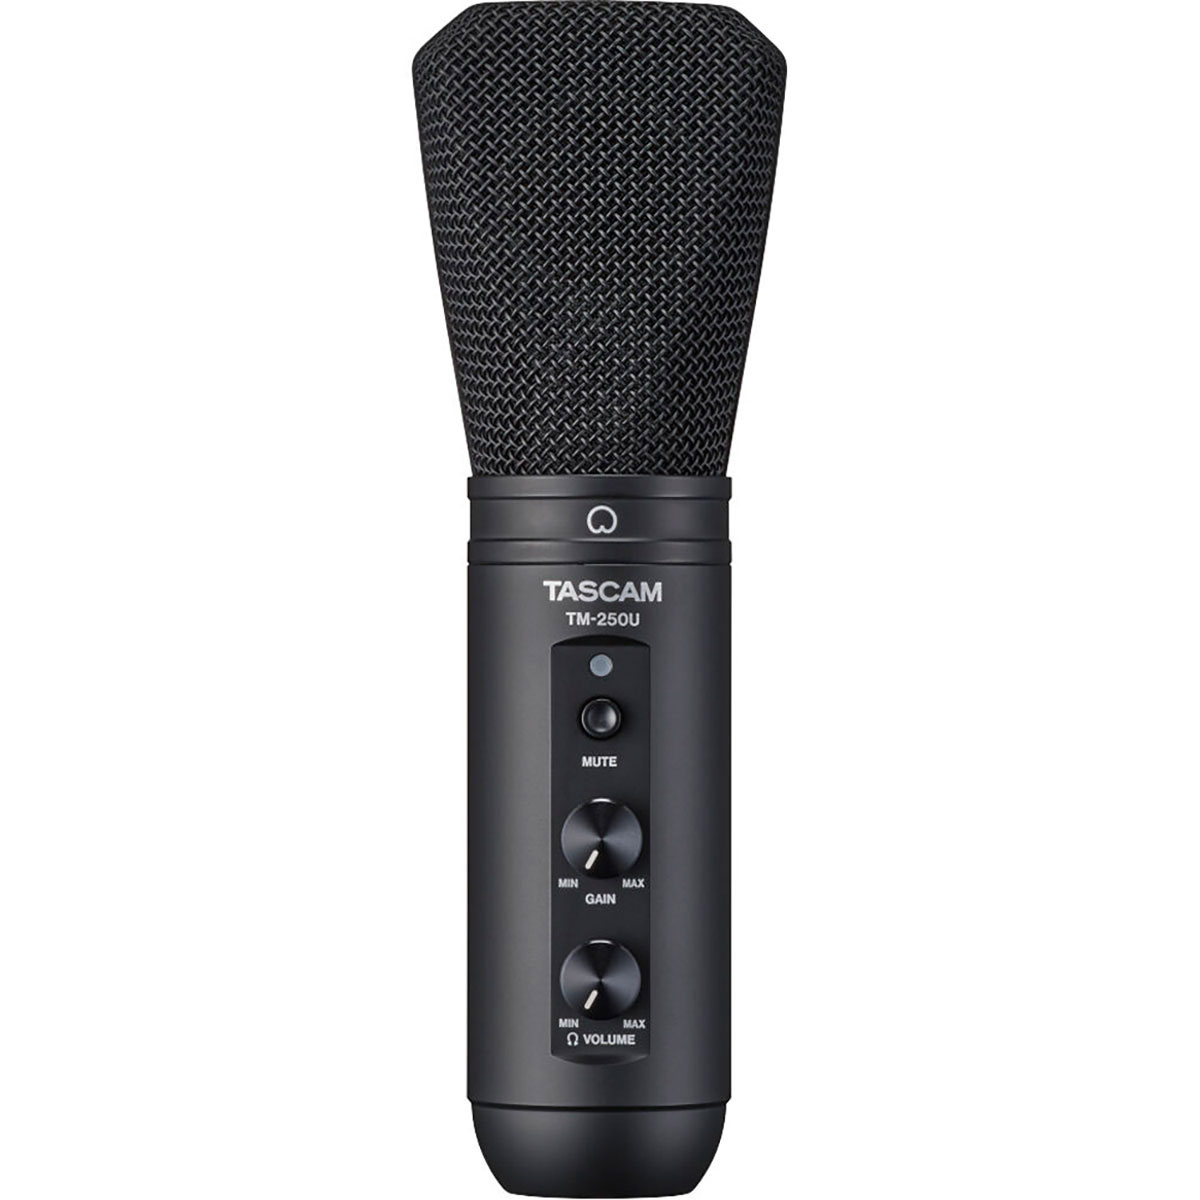 Tascam - TM-250U, USB CONDENSER MICROPHONE FOR PODCASTING, CONFERENCING, COMPUTER RECORDING, AND ONLINE AUDIO